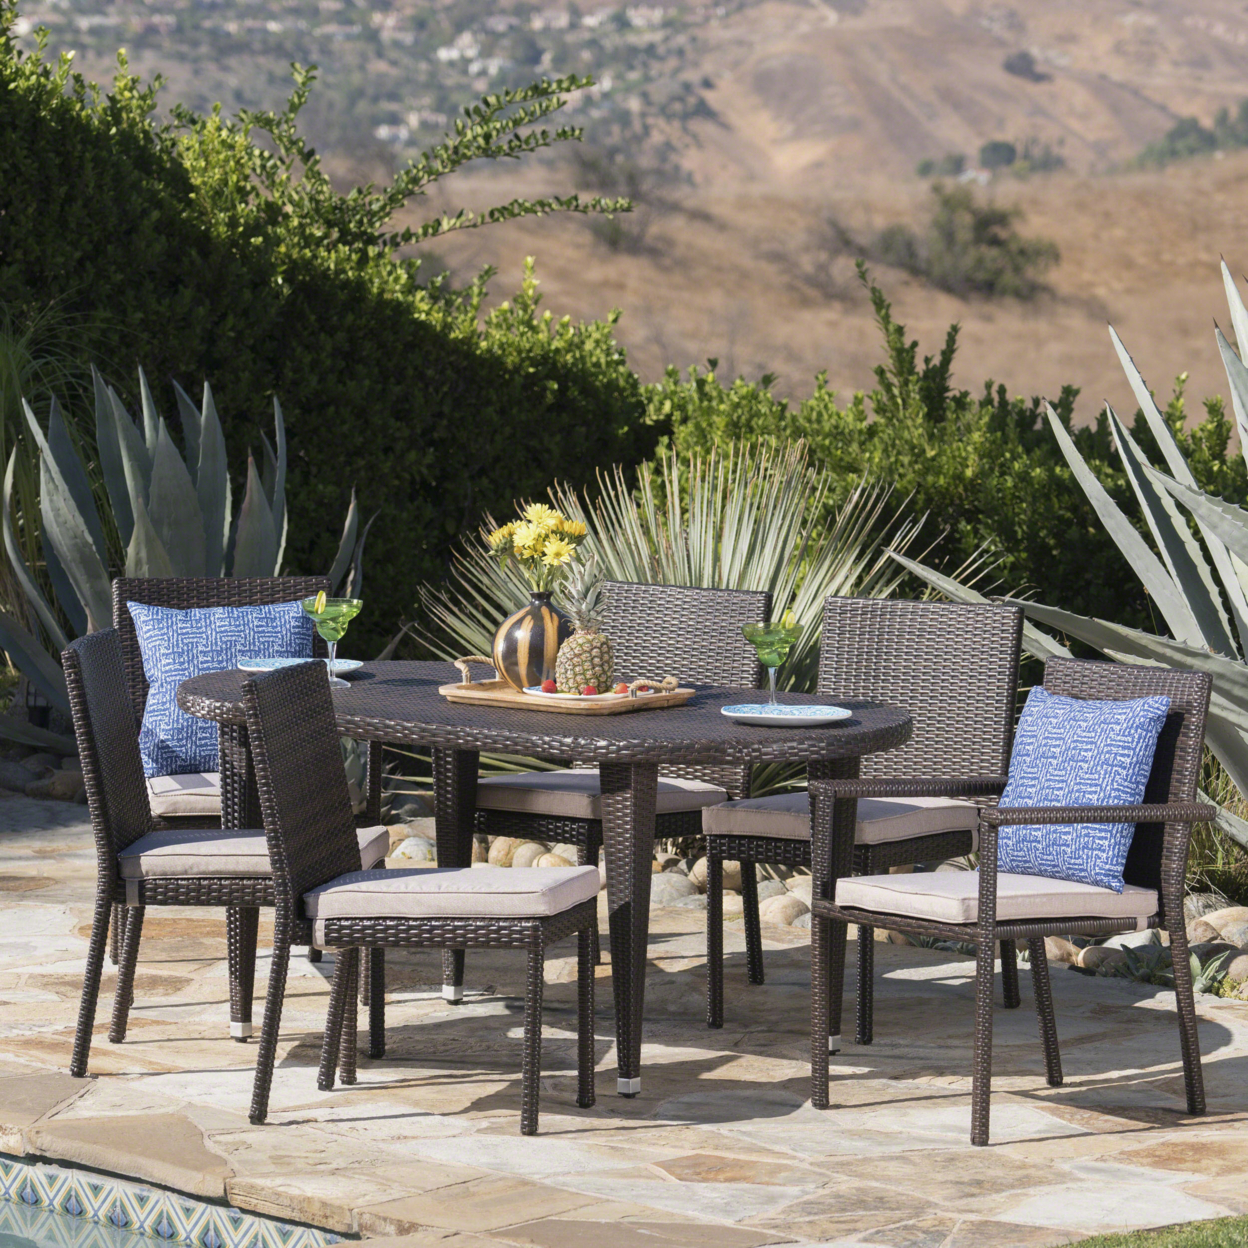 Logan Outdoor 7 Piece Wicker Dining Set With Armed And Armless Stacking Chairs - Multibrown Wicker